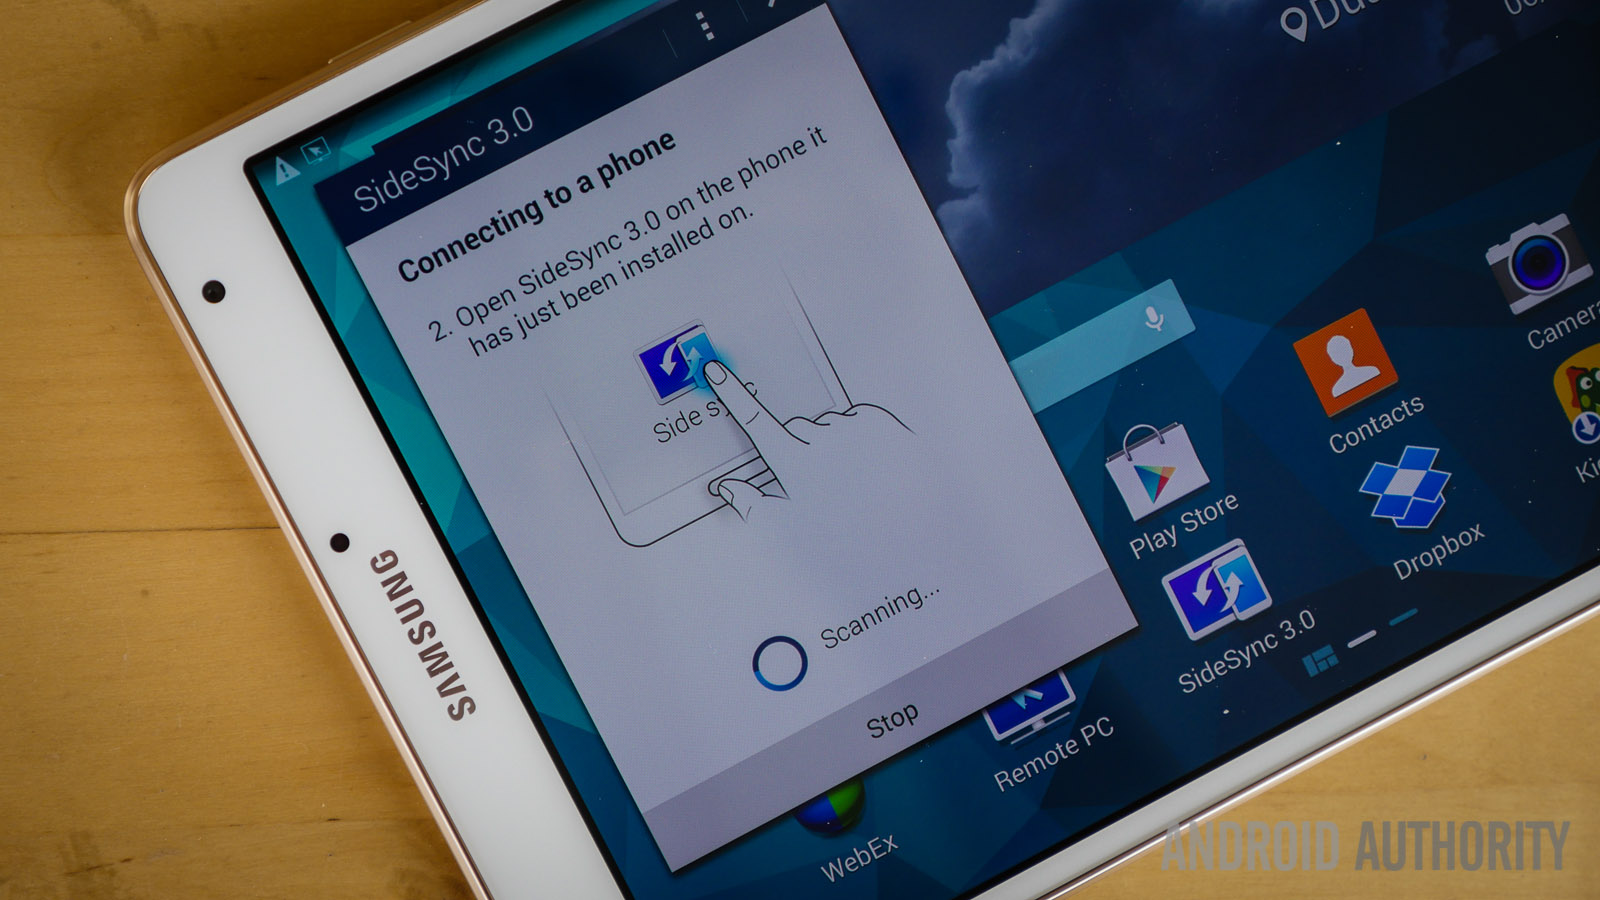 samsung galaxy tab s 8.4 review (15 of 27)